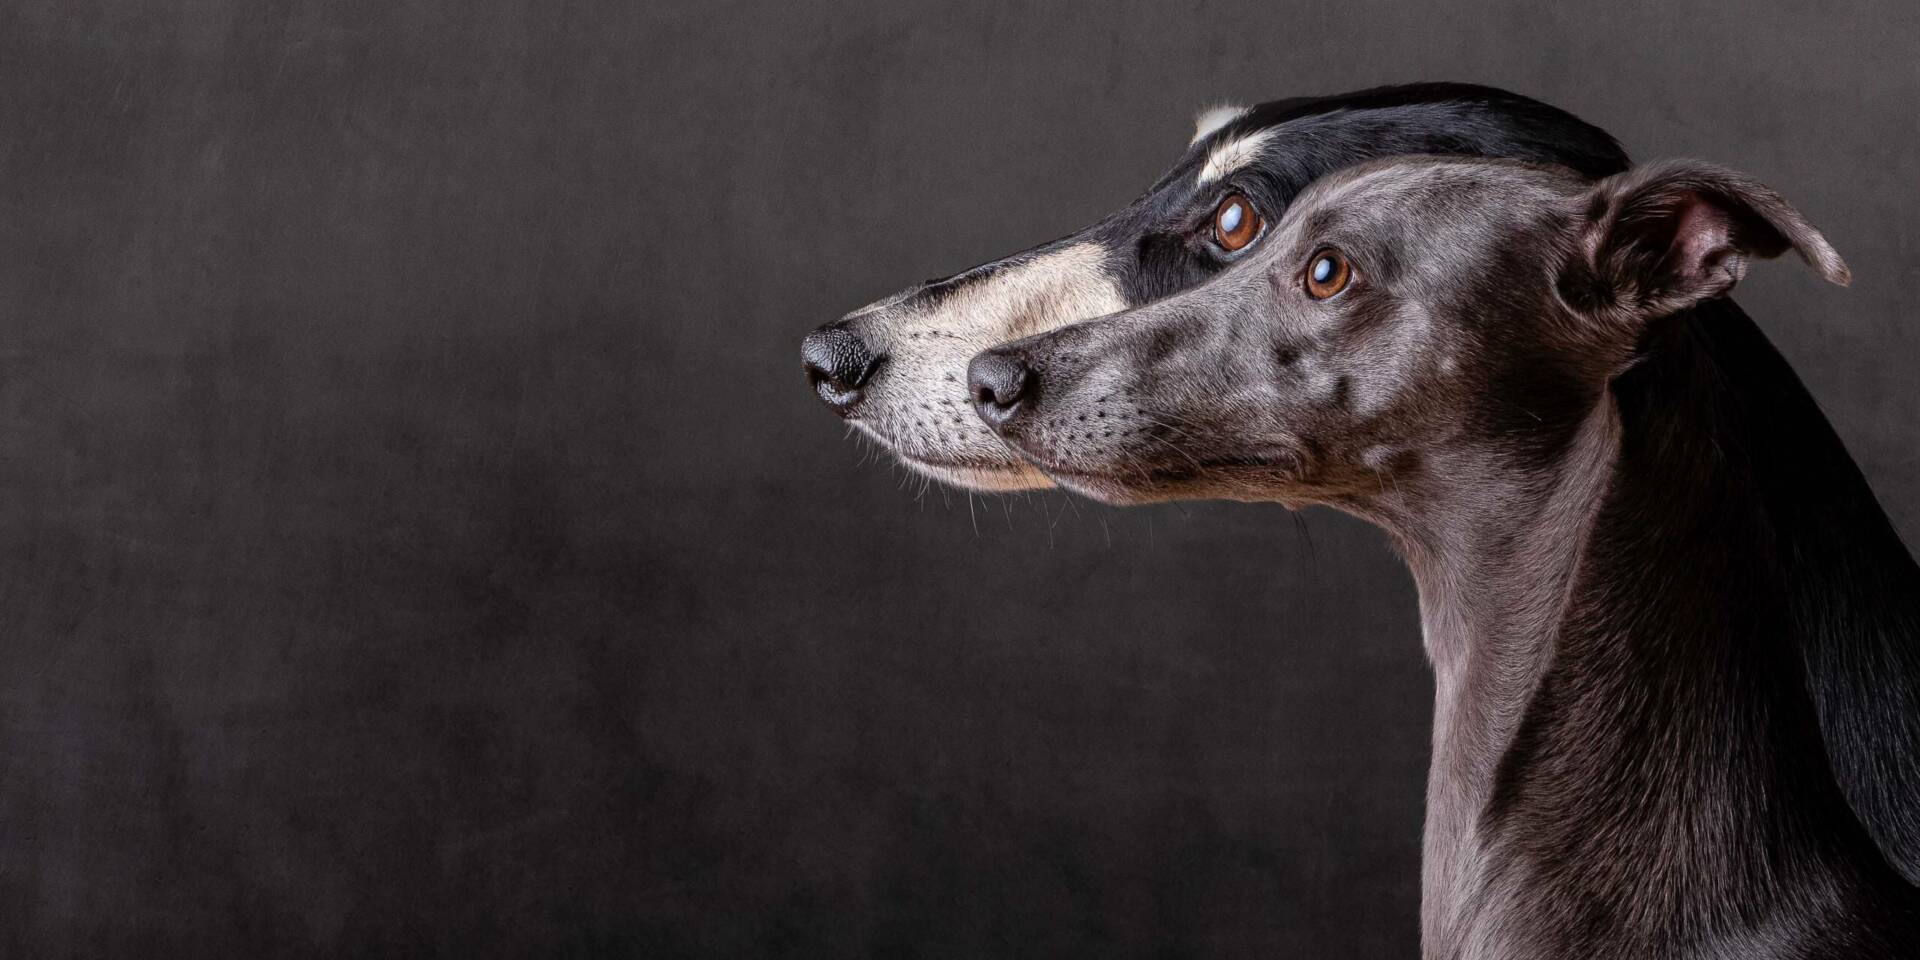 Greyhounds on a grey background by Mark Hewitson of Mark Hewitson Photography, Thame, Oxfordshire